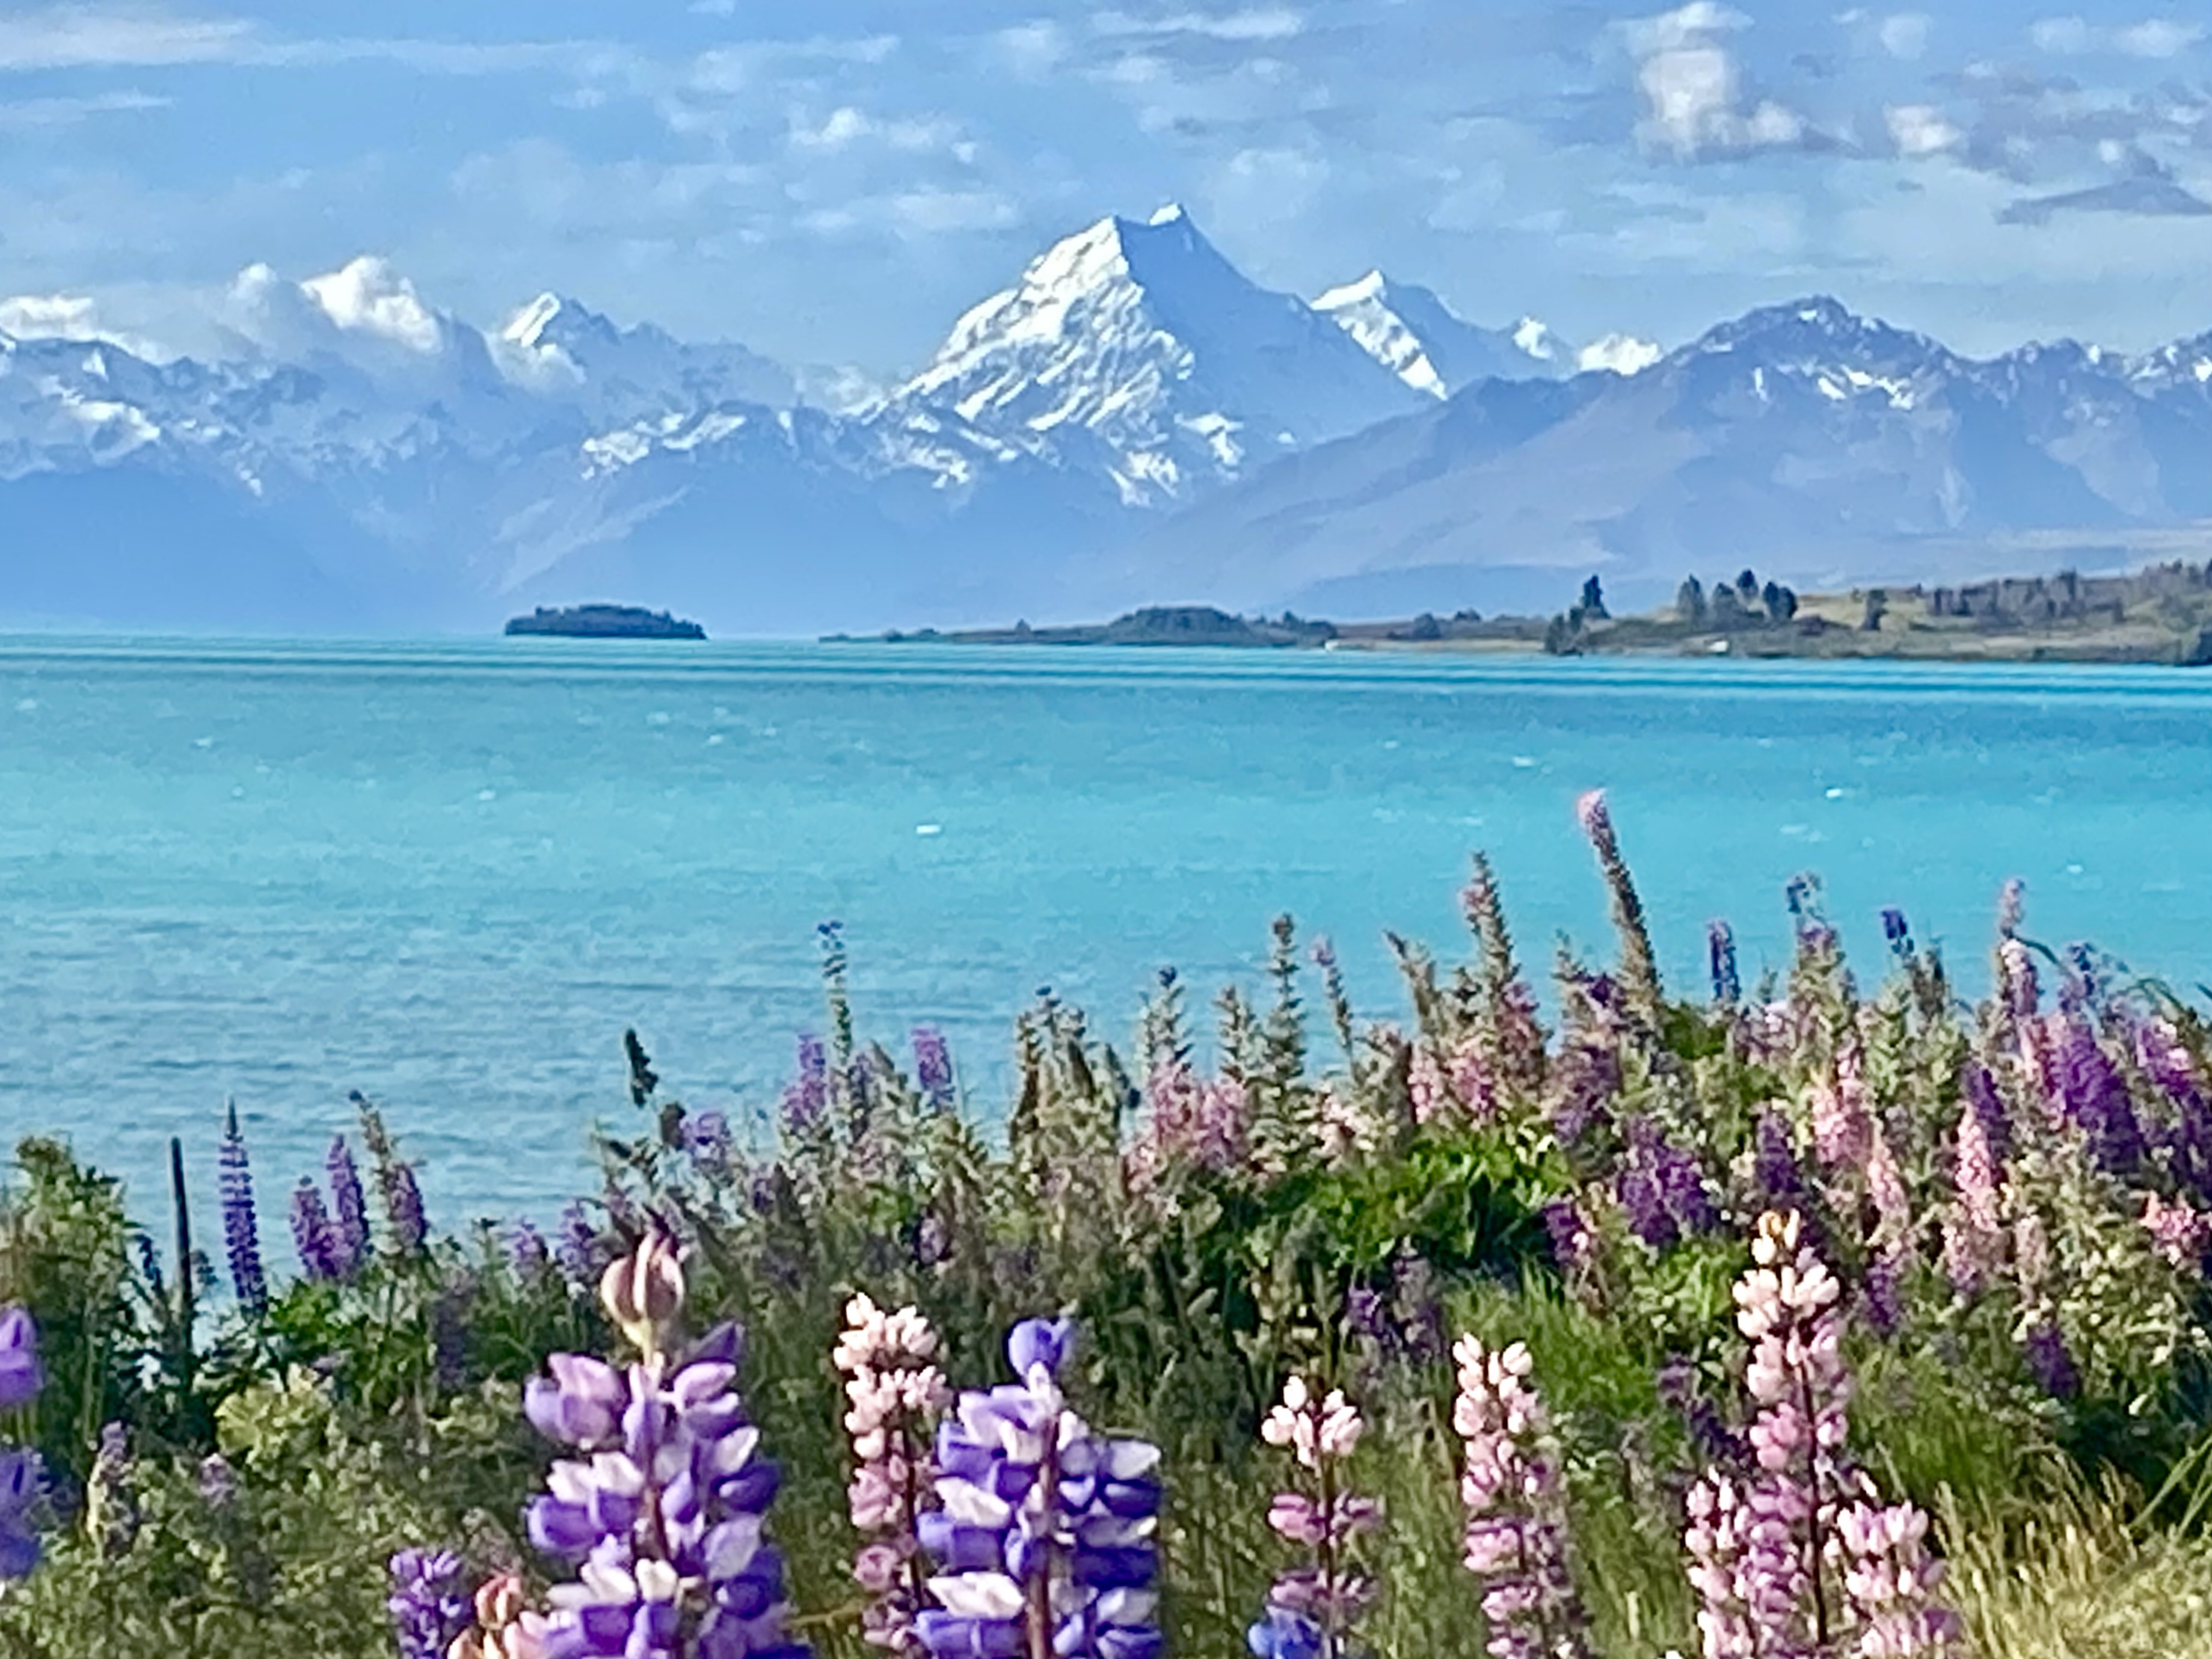 Landscape picture of mountains, water and flowers